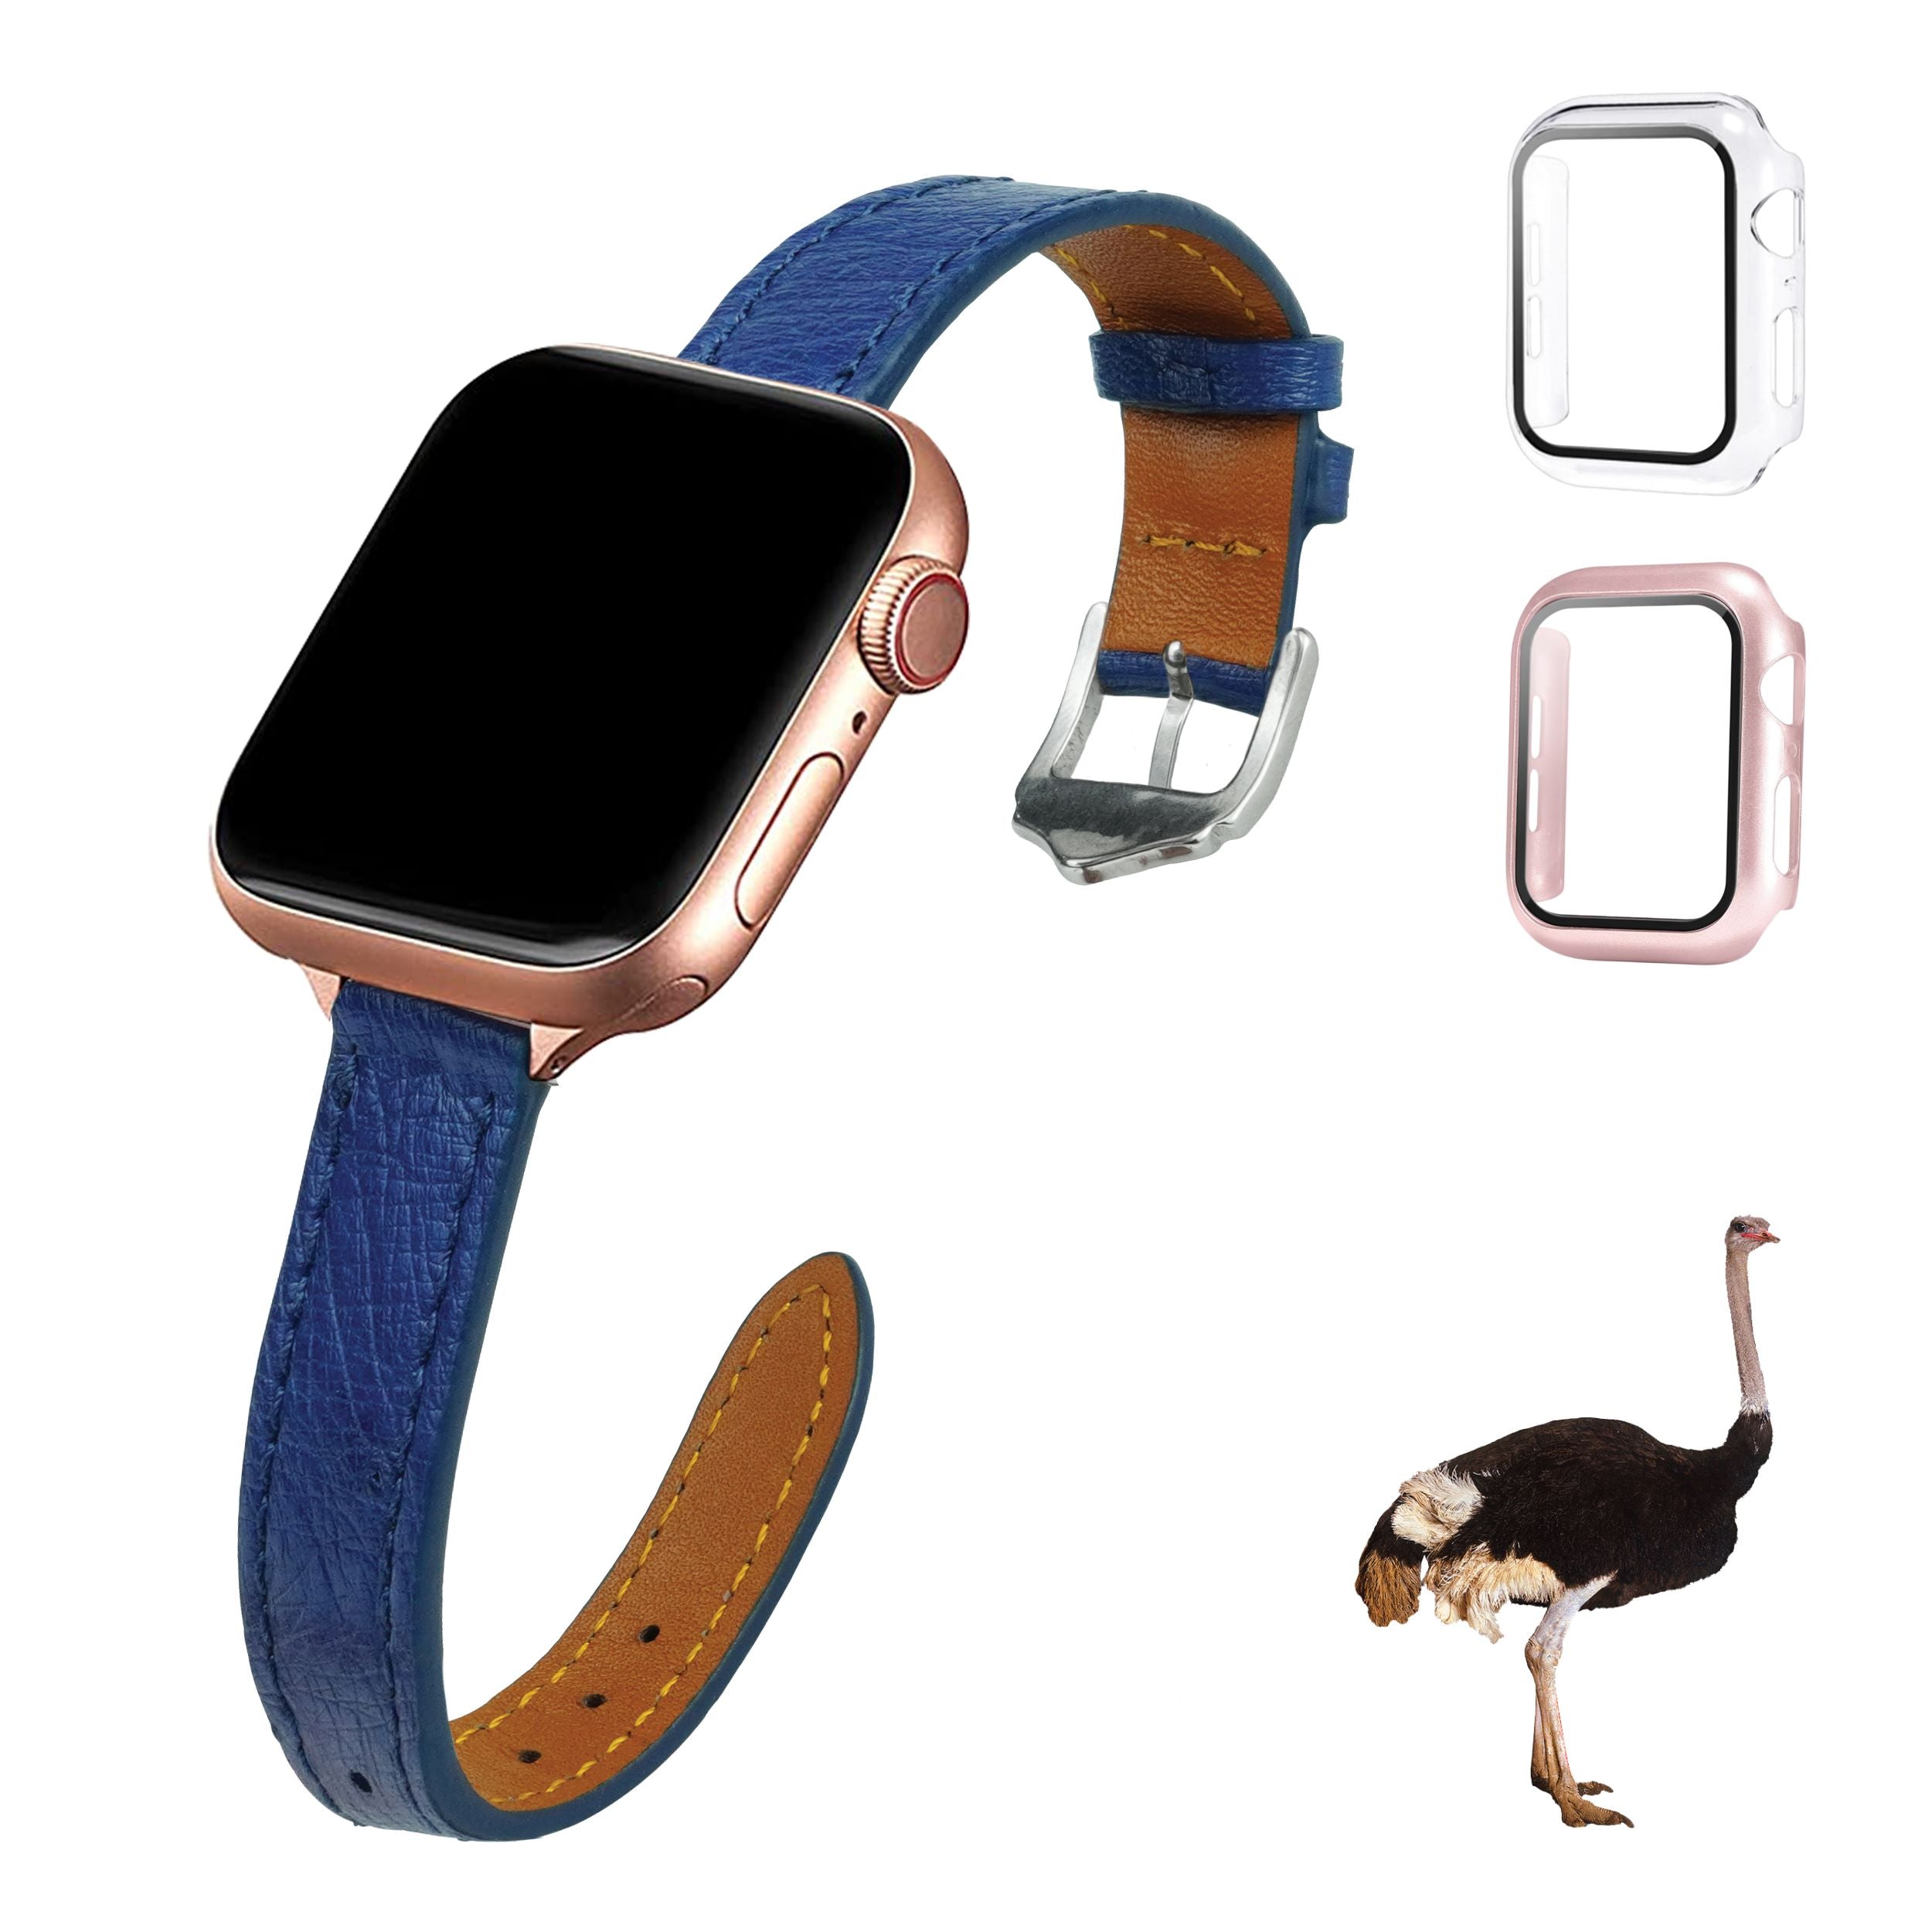 Blue Flat Ostrich Leather Band Compatible Apple Watch Iwatch 44mm Screen Protector Case Black Adapter Replacement Strap For Smartwatch Series 4 5 6 SE Leather Handmade AW-184S-W-44MM